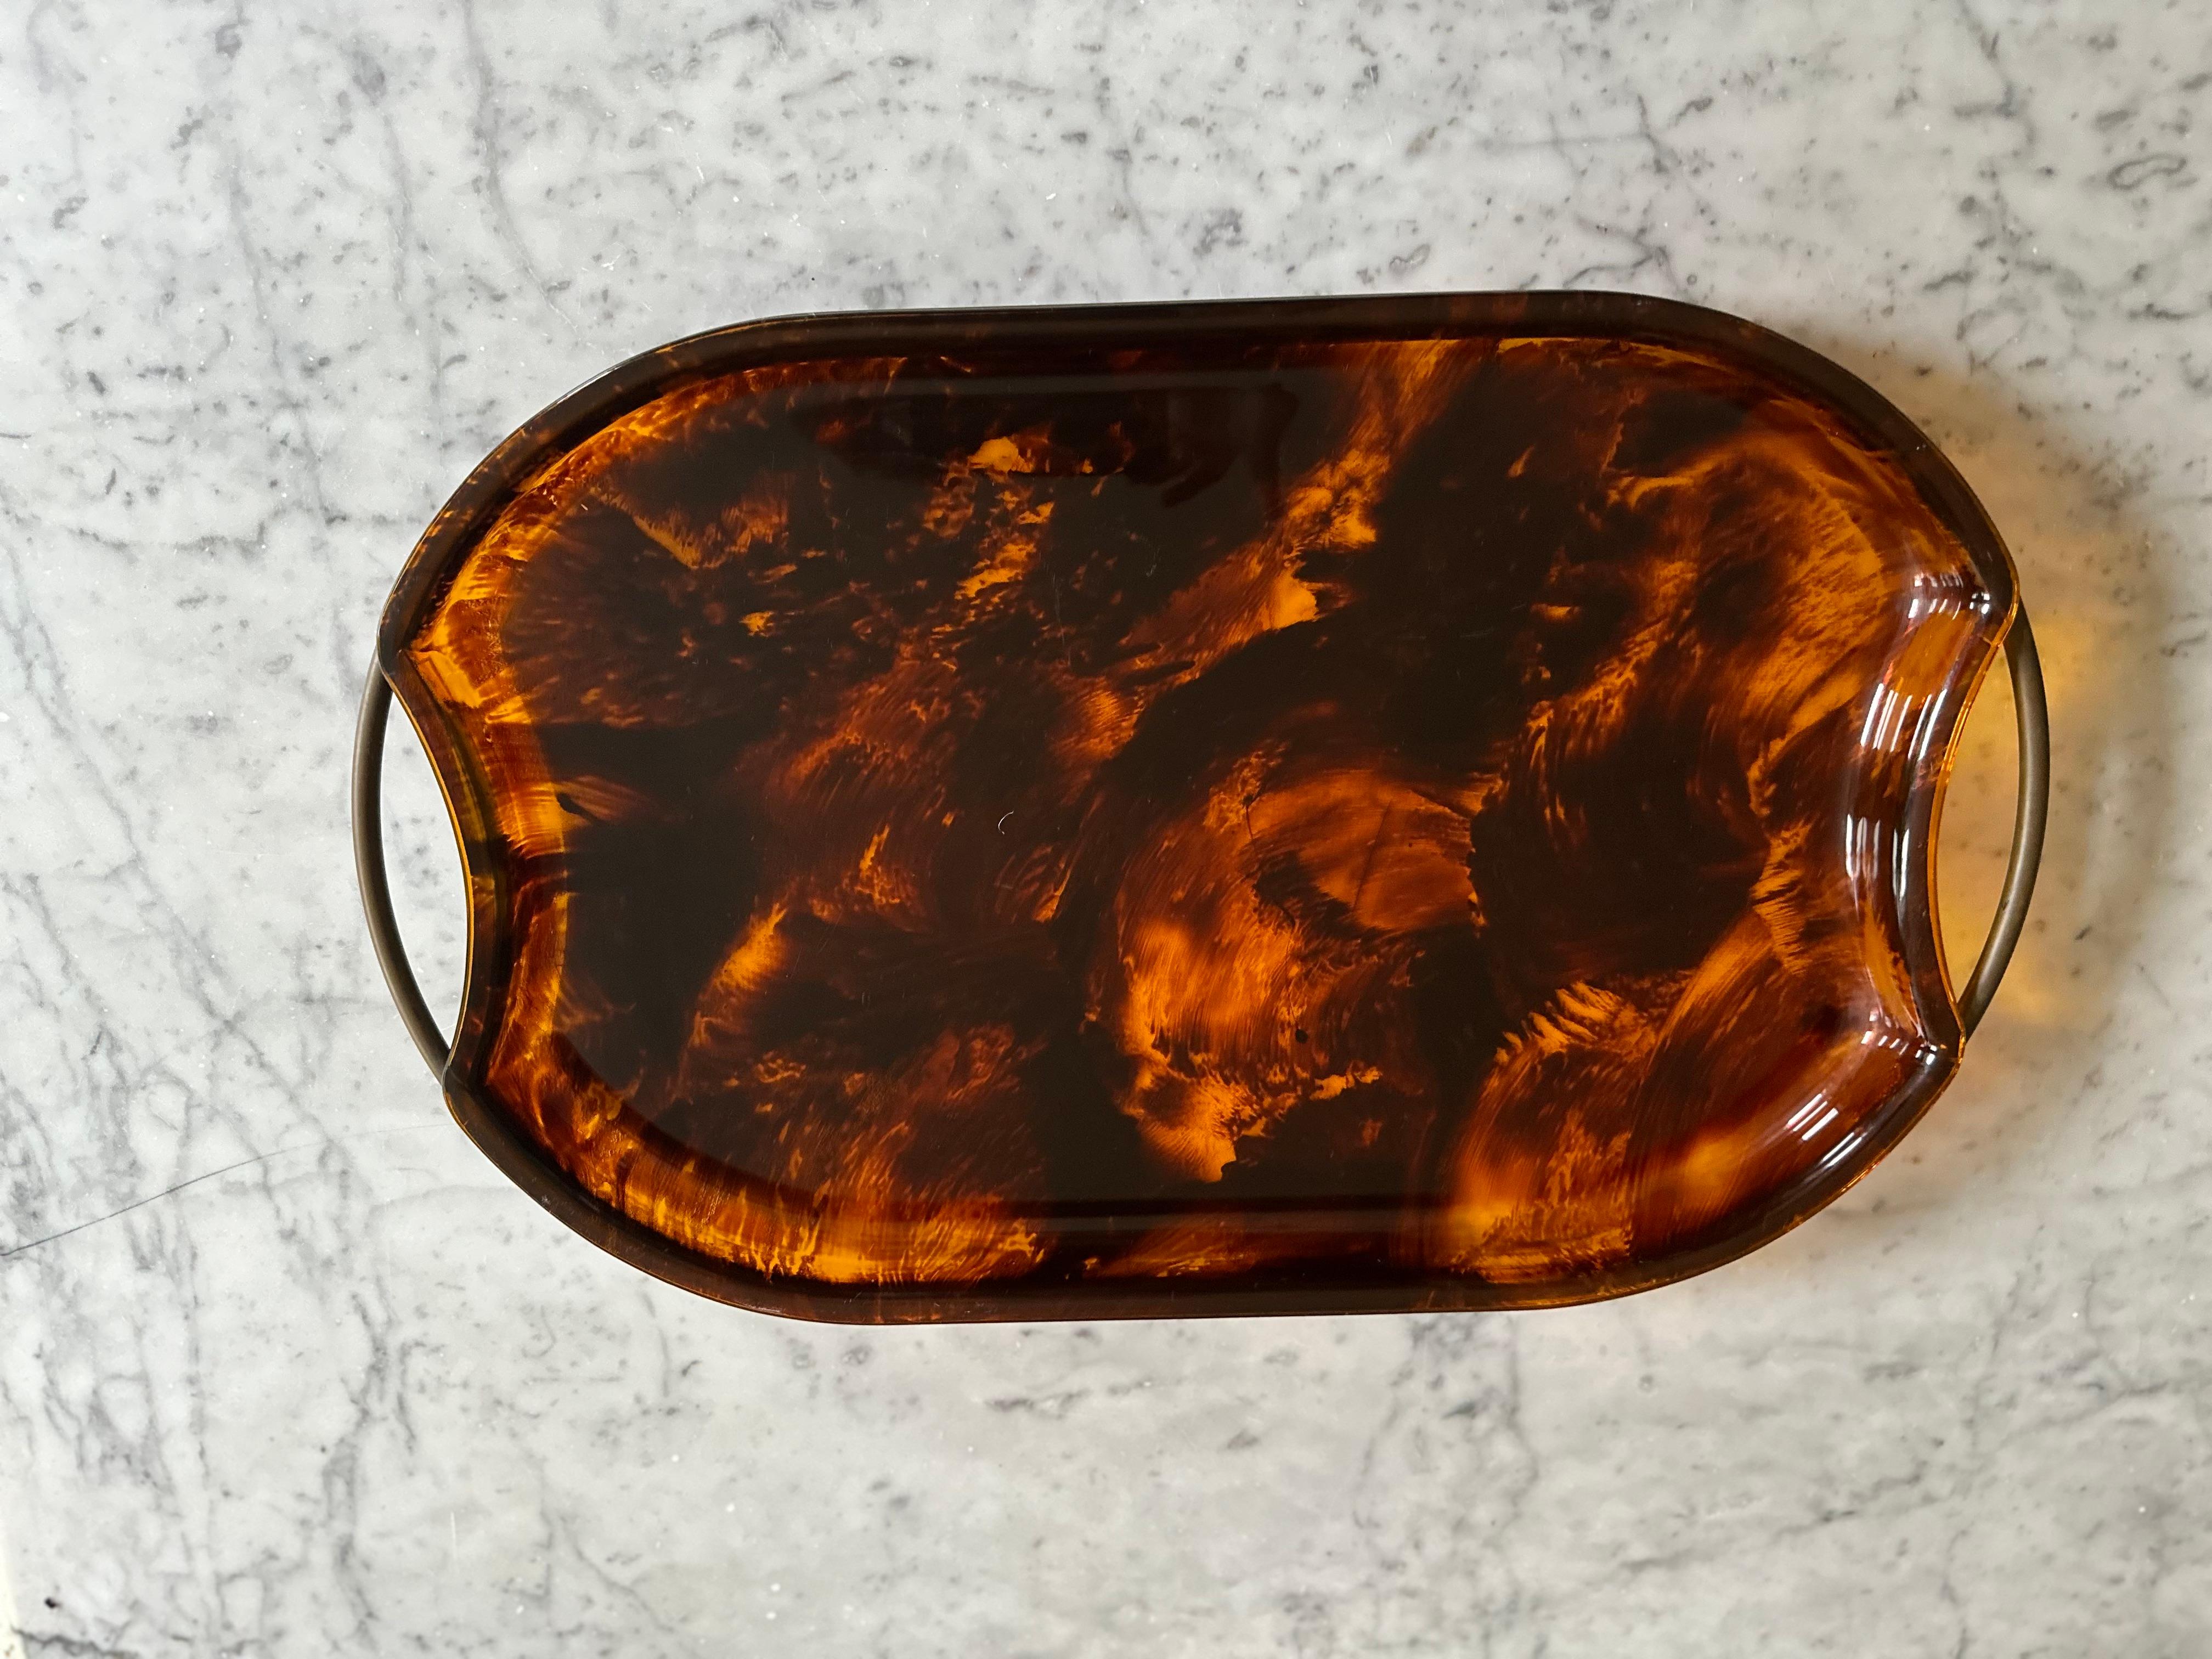  Guzzini’s Oval Lucite Serving Tray from 1970s Italy – Faux Tortoiseshell -brass For Sale 7